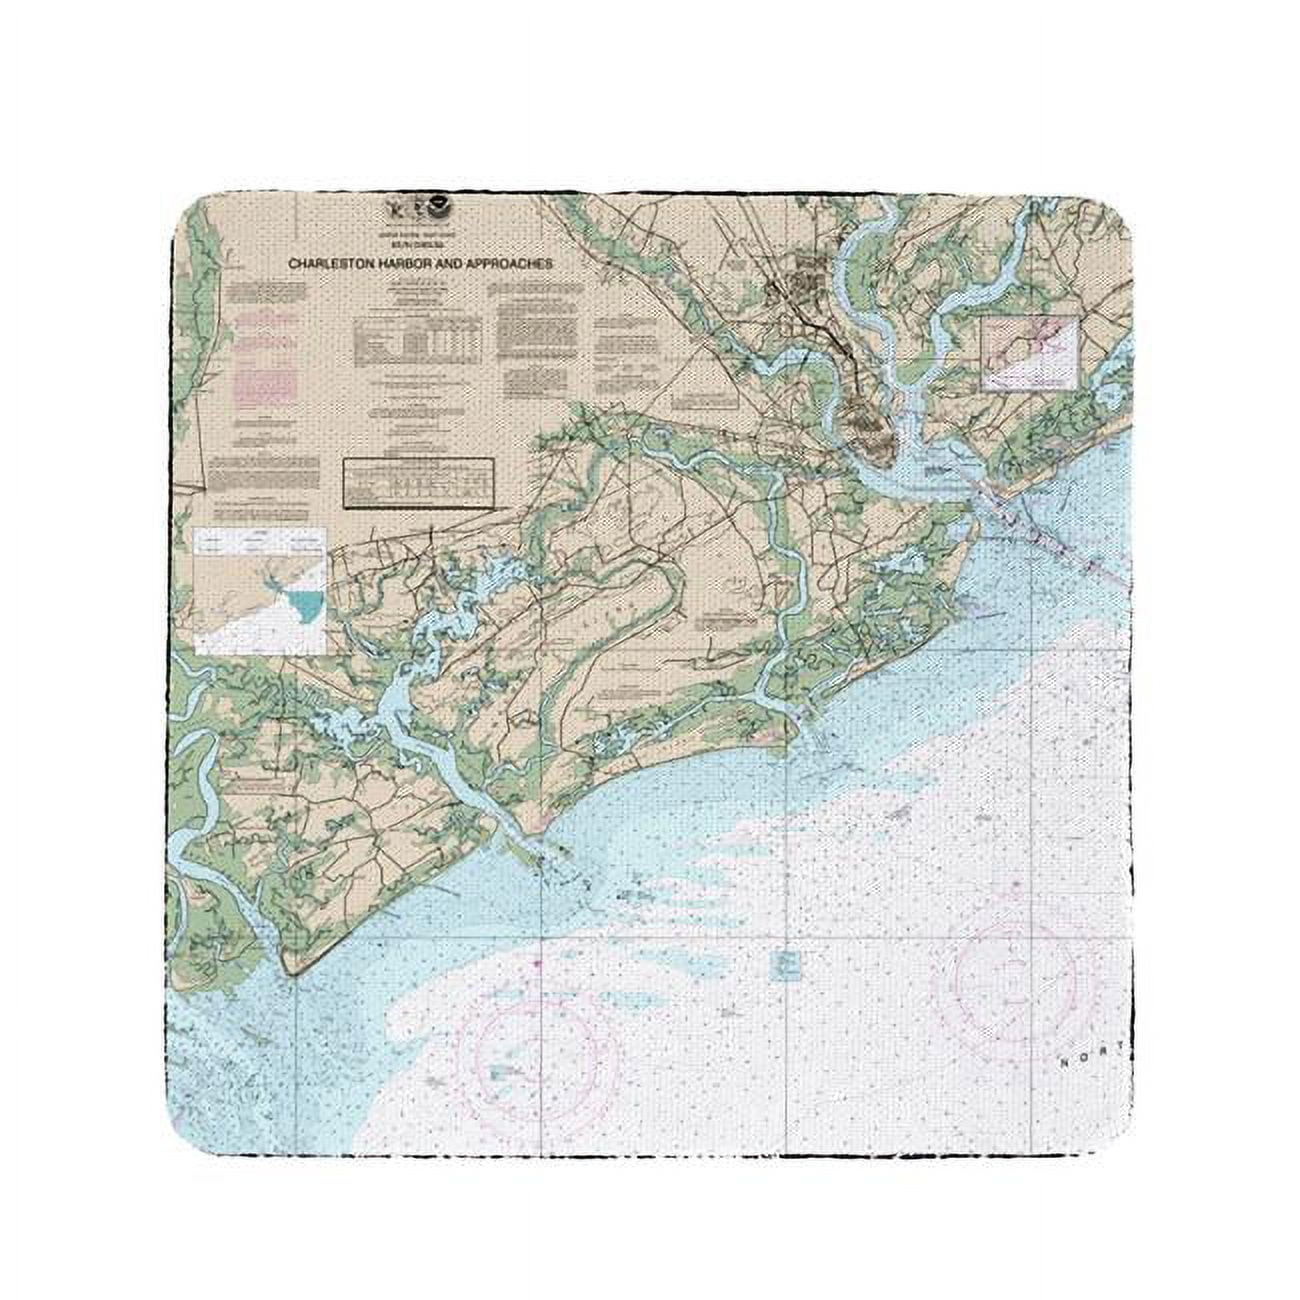 Ct11521 4 X 4 In. Charleston Harbor & Approaches, Sc Nautical Map Coaster - Set Of 4